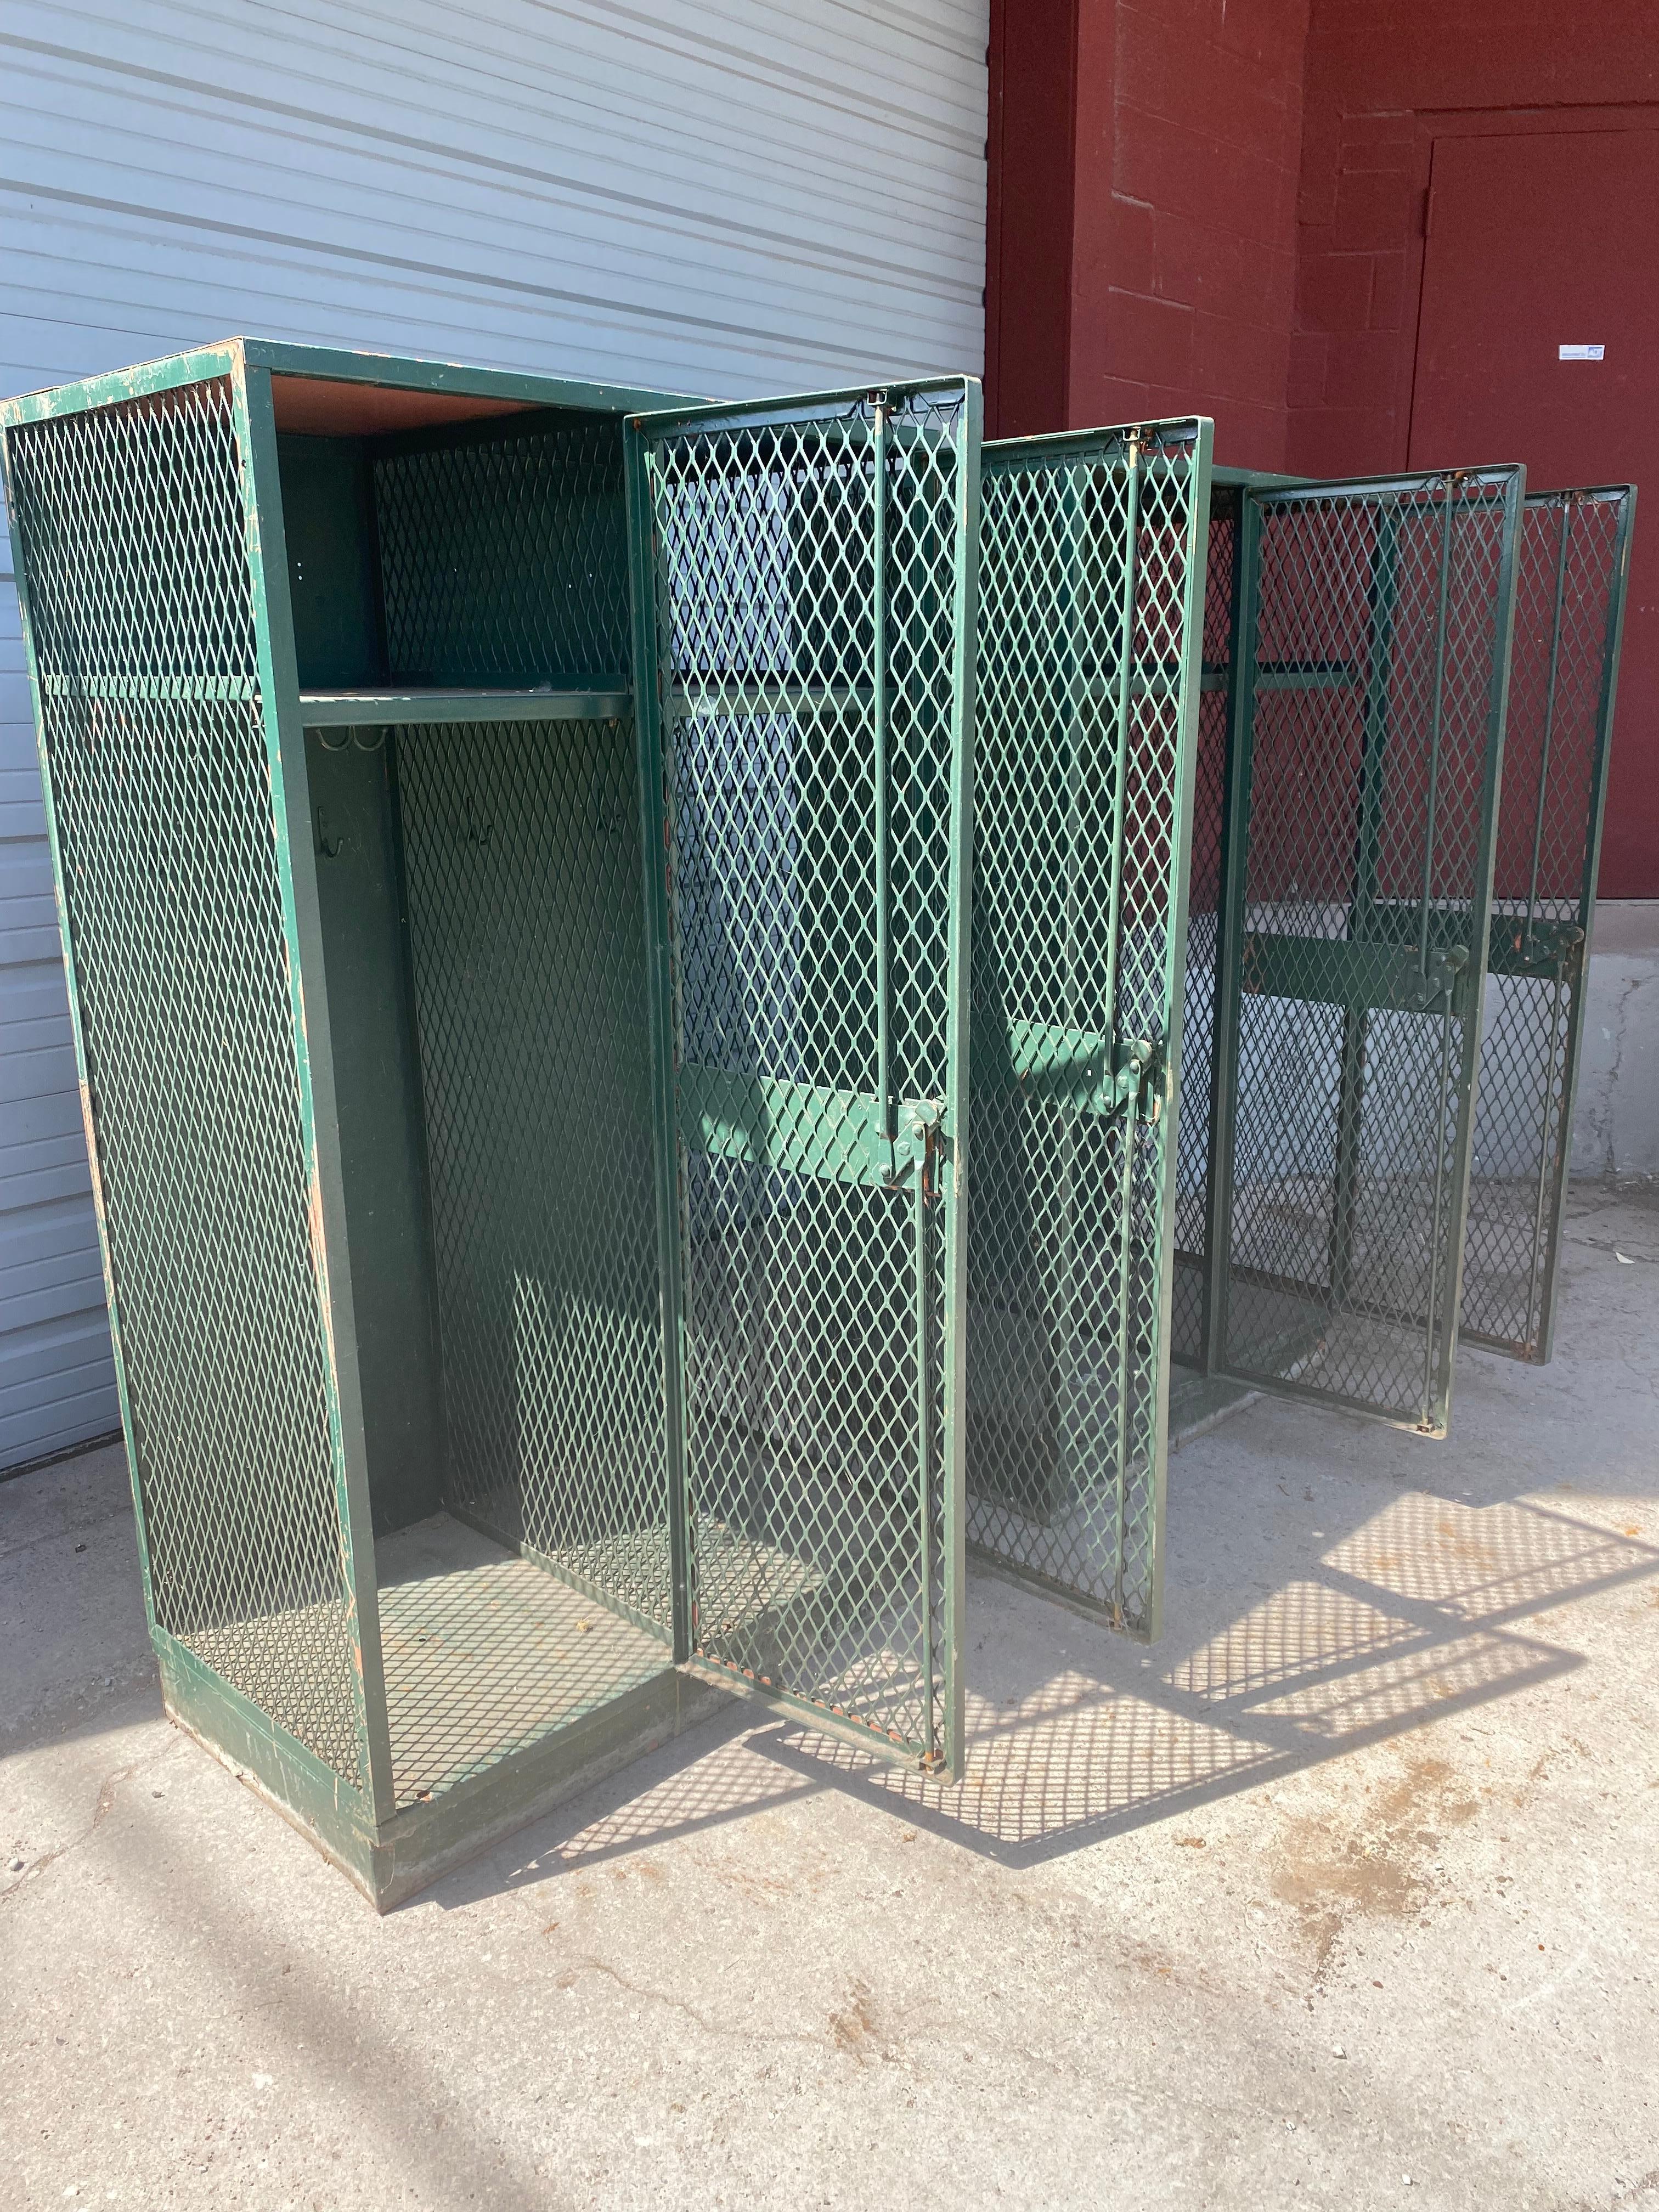 Pair industrial metal / steel cage -mesh lockers, great design, color, patina.., two door, shelves to top. Coat hooks under shelf, hand delivery avail to New York City or anywhere en route from Buffalo NY.